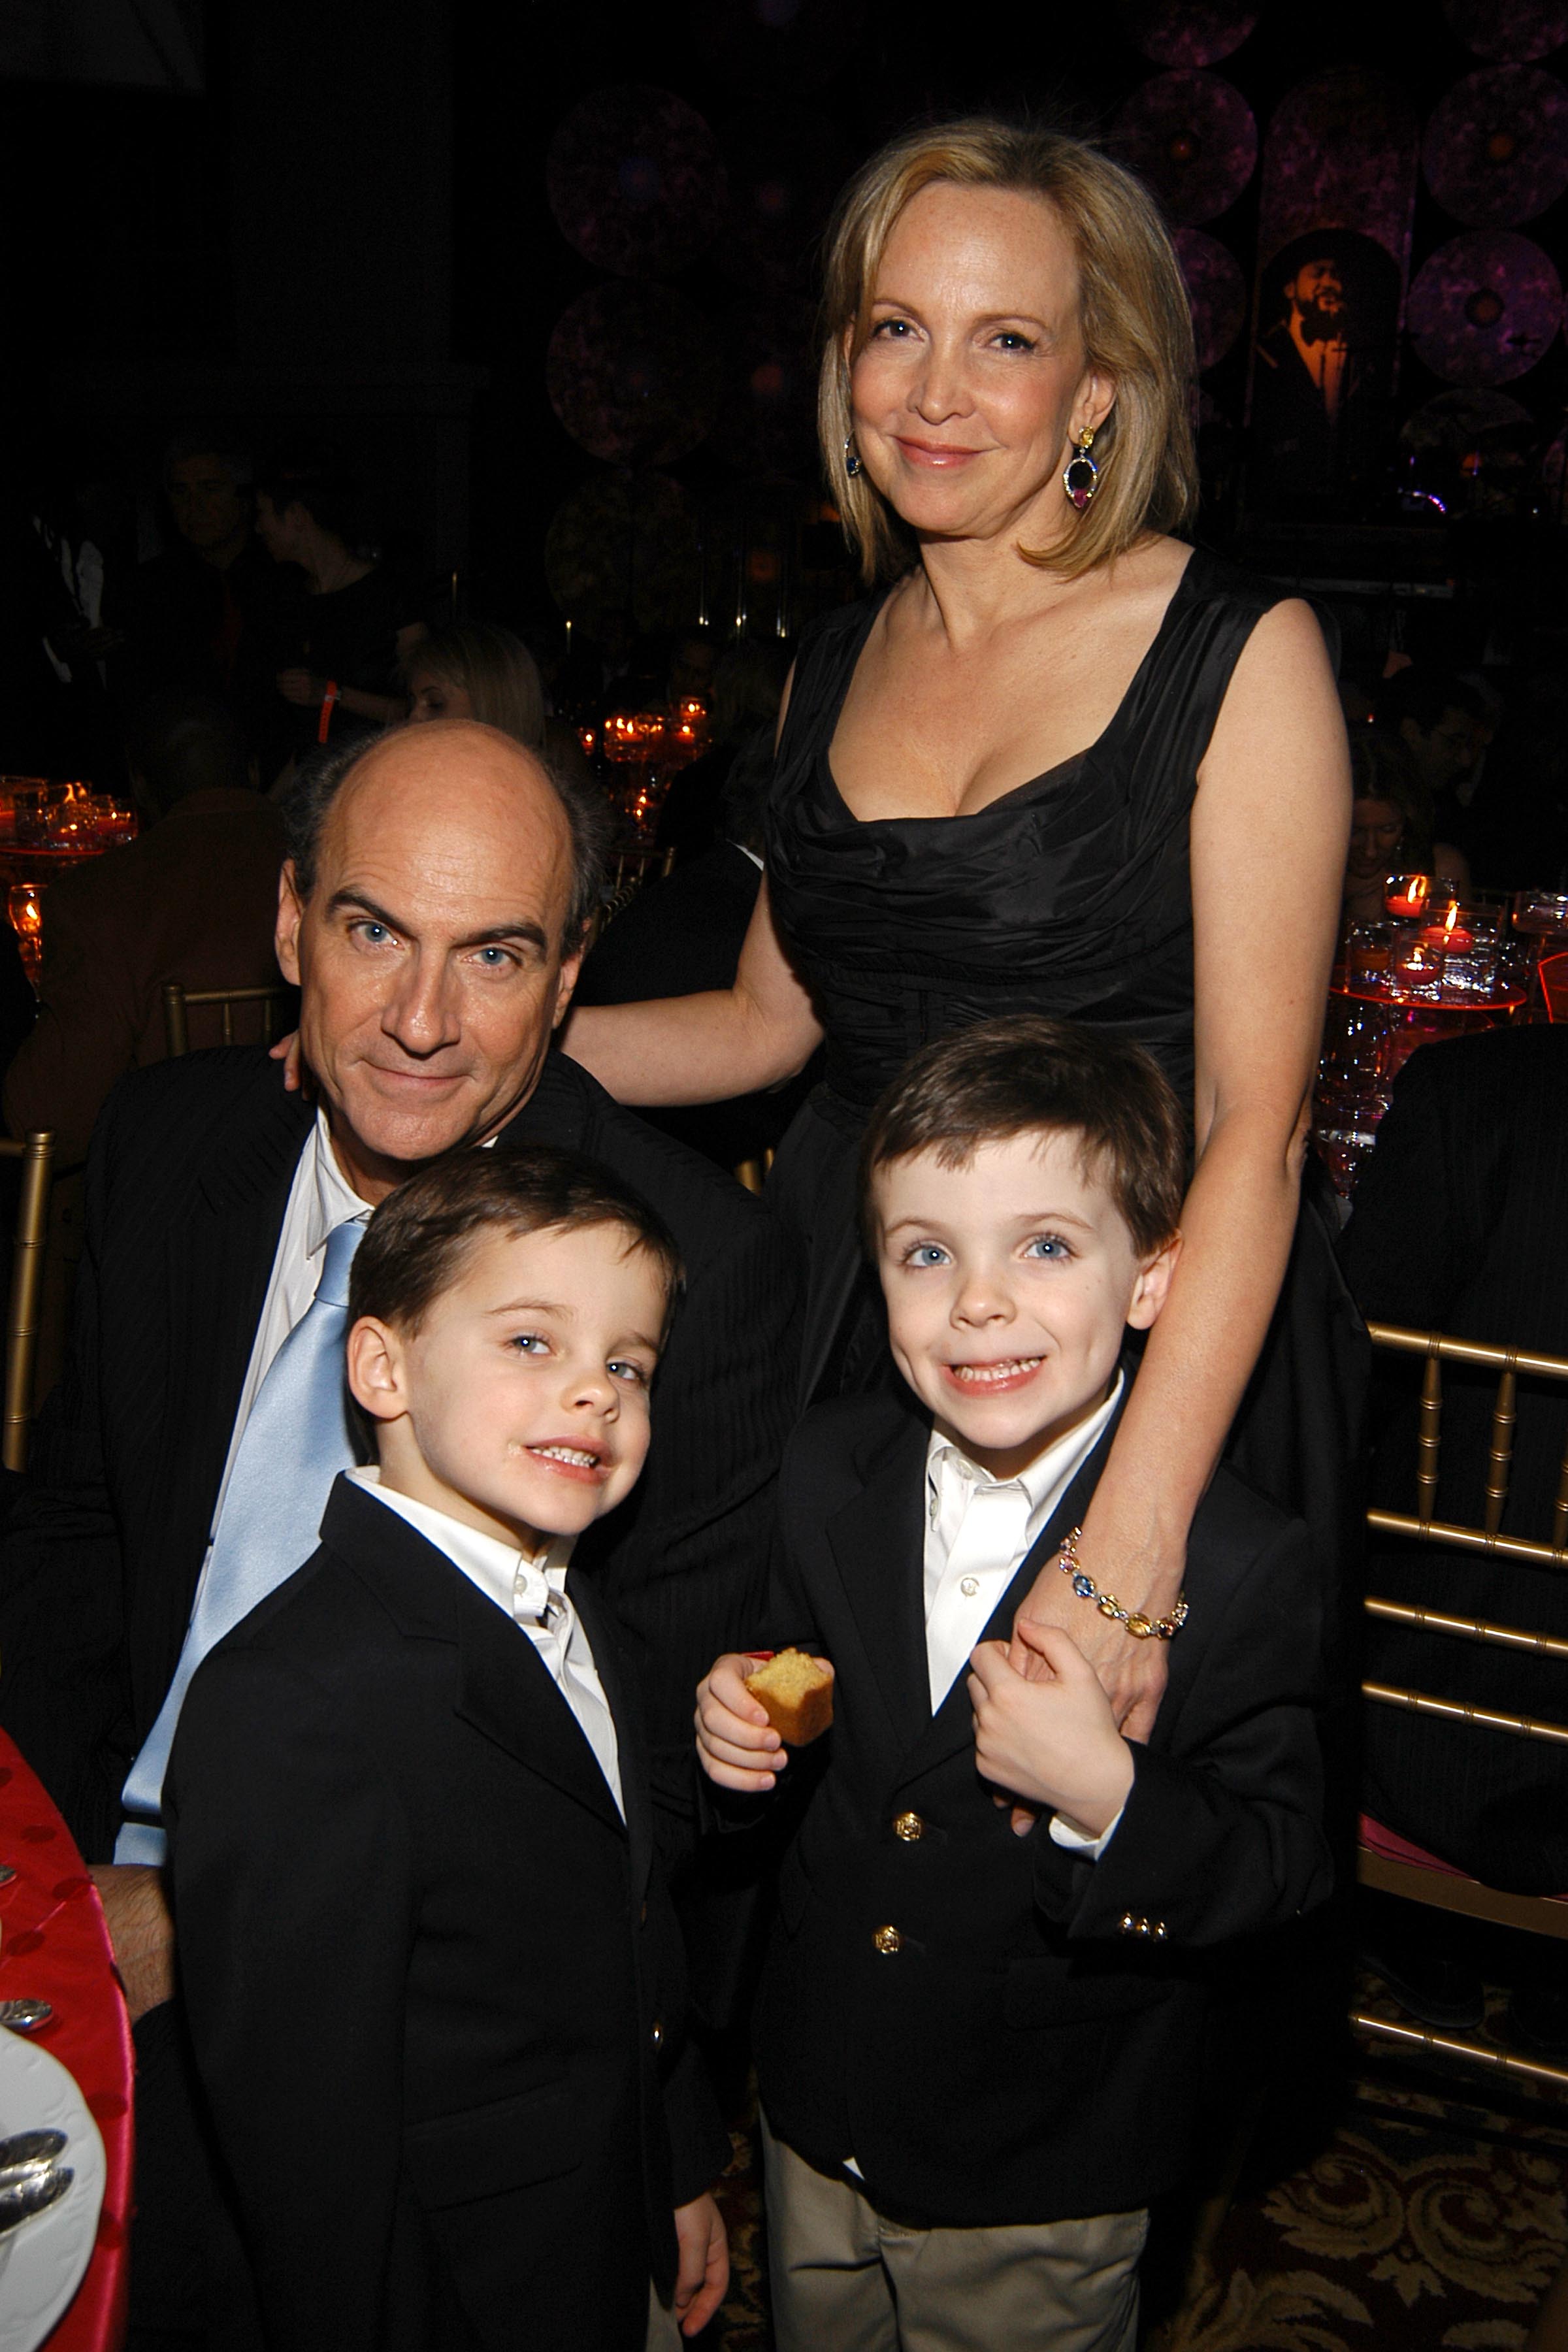 James Talyor, his wife Caroline Smedvig, and their sons Henry and Rufus Taylor at the Entertainment Industry Foundation's NCCRA Colon Cancer Benefit on March 15, 2006 | Source: Getty Images